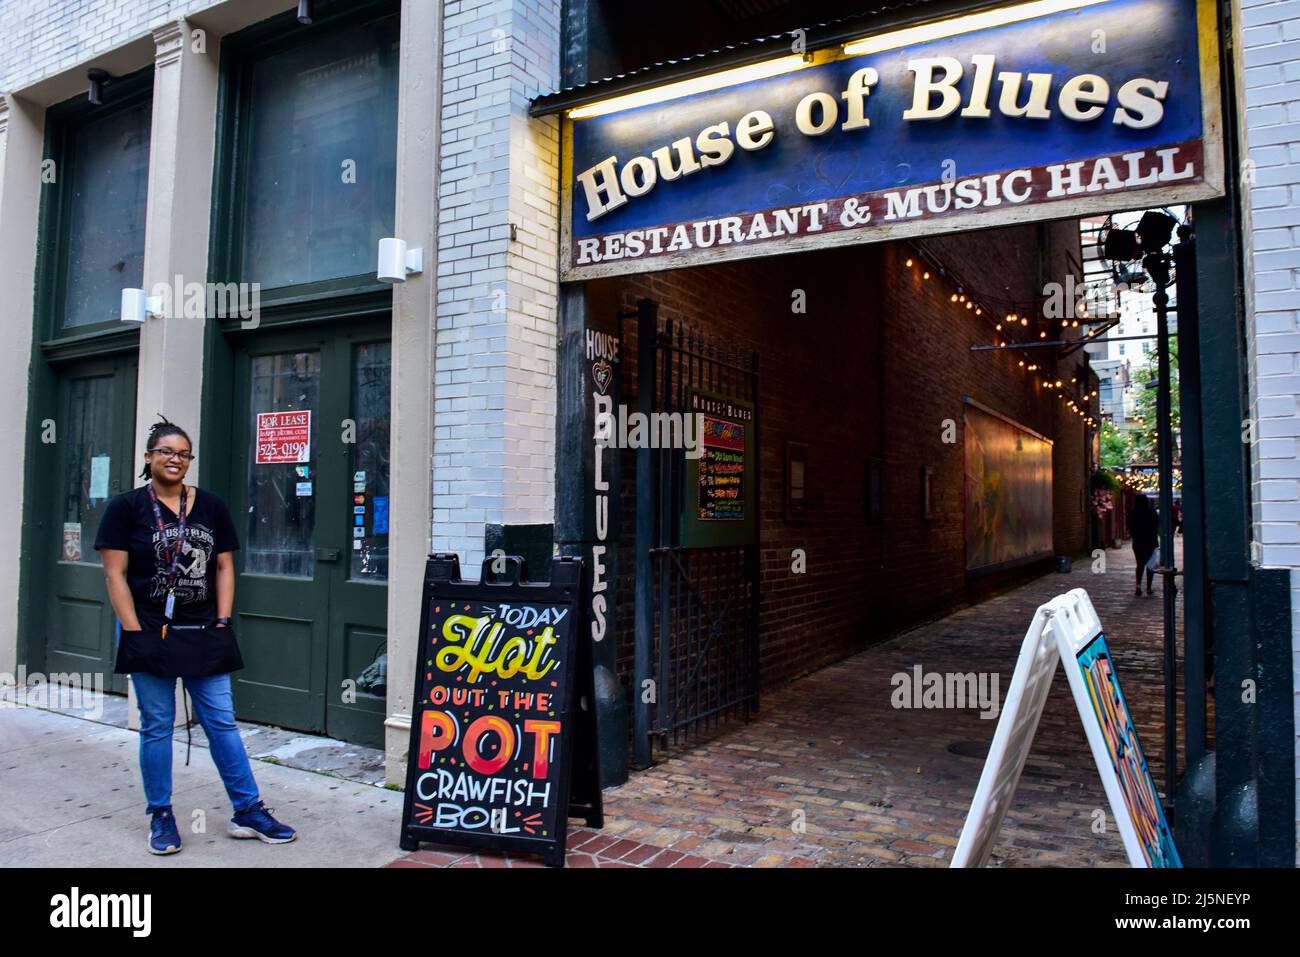 House of Blues in the French Quarter, New Orleans, Louisiana. Stock Photo